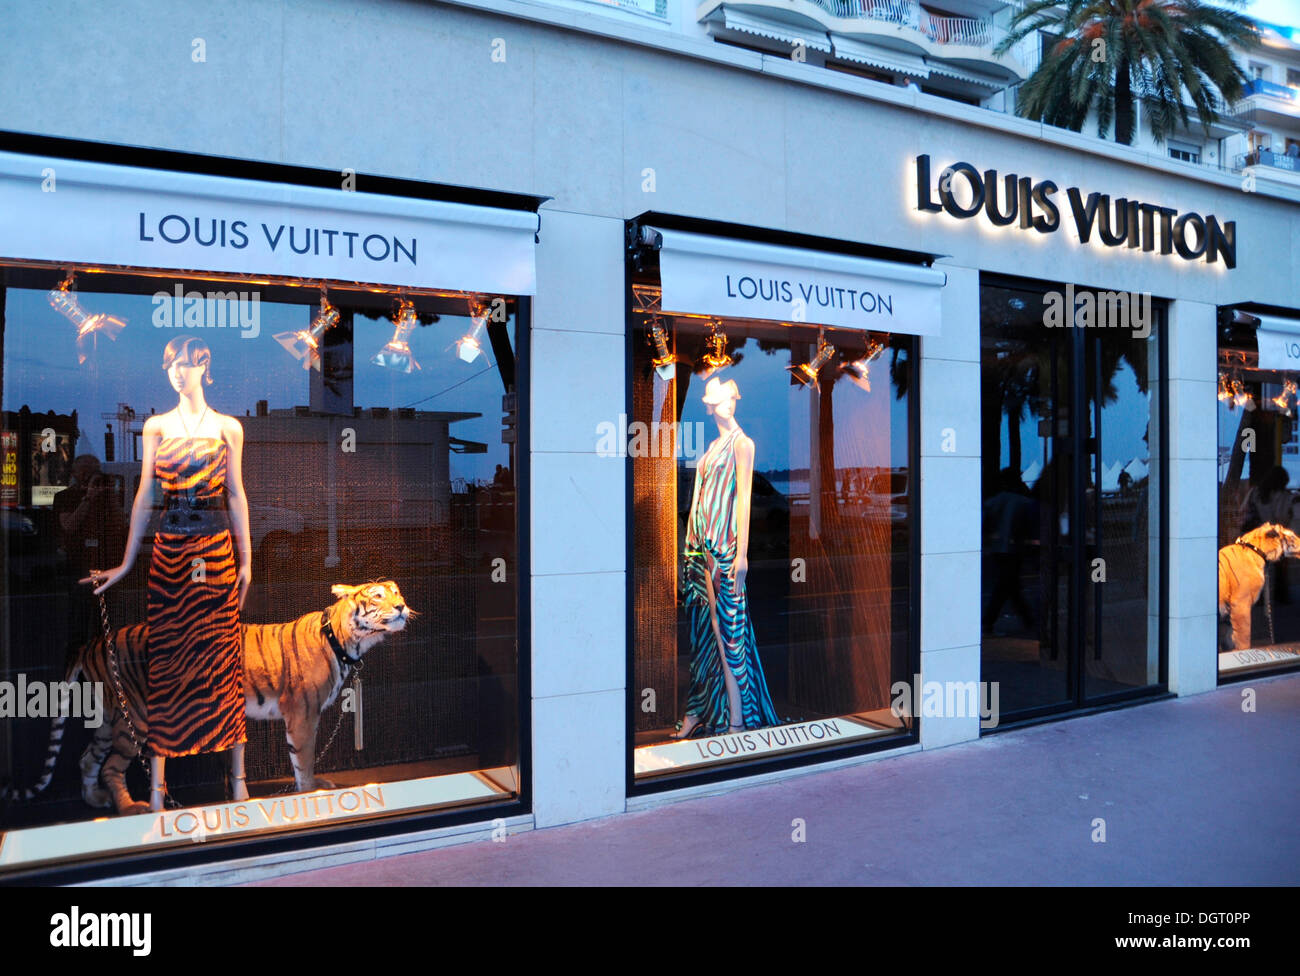 Clear Clings on Louis Vuitton Store Windows